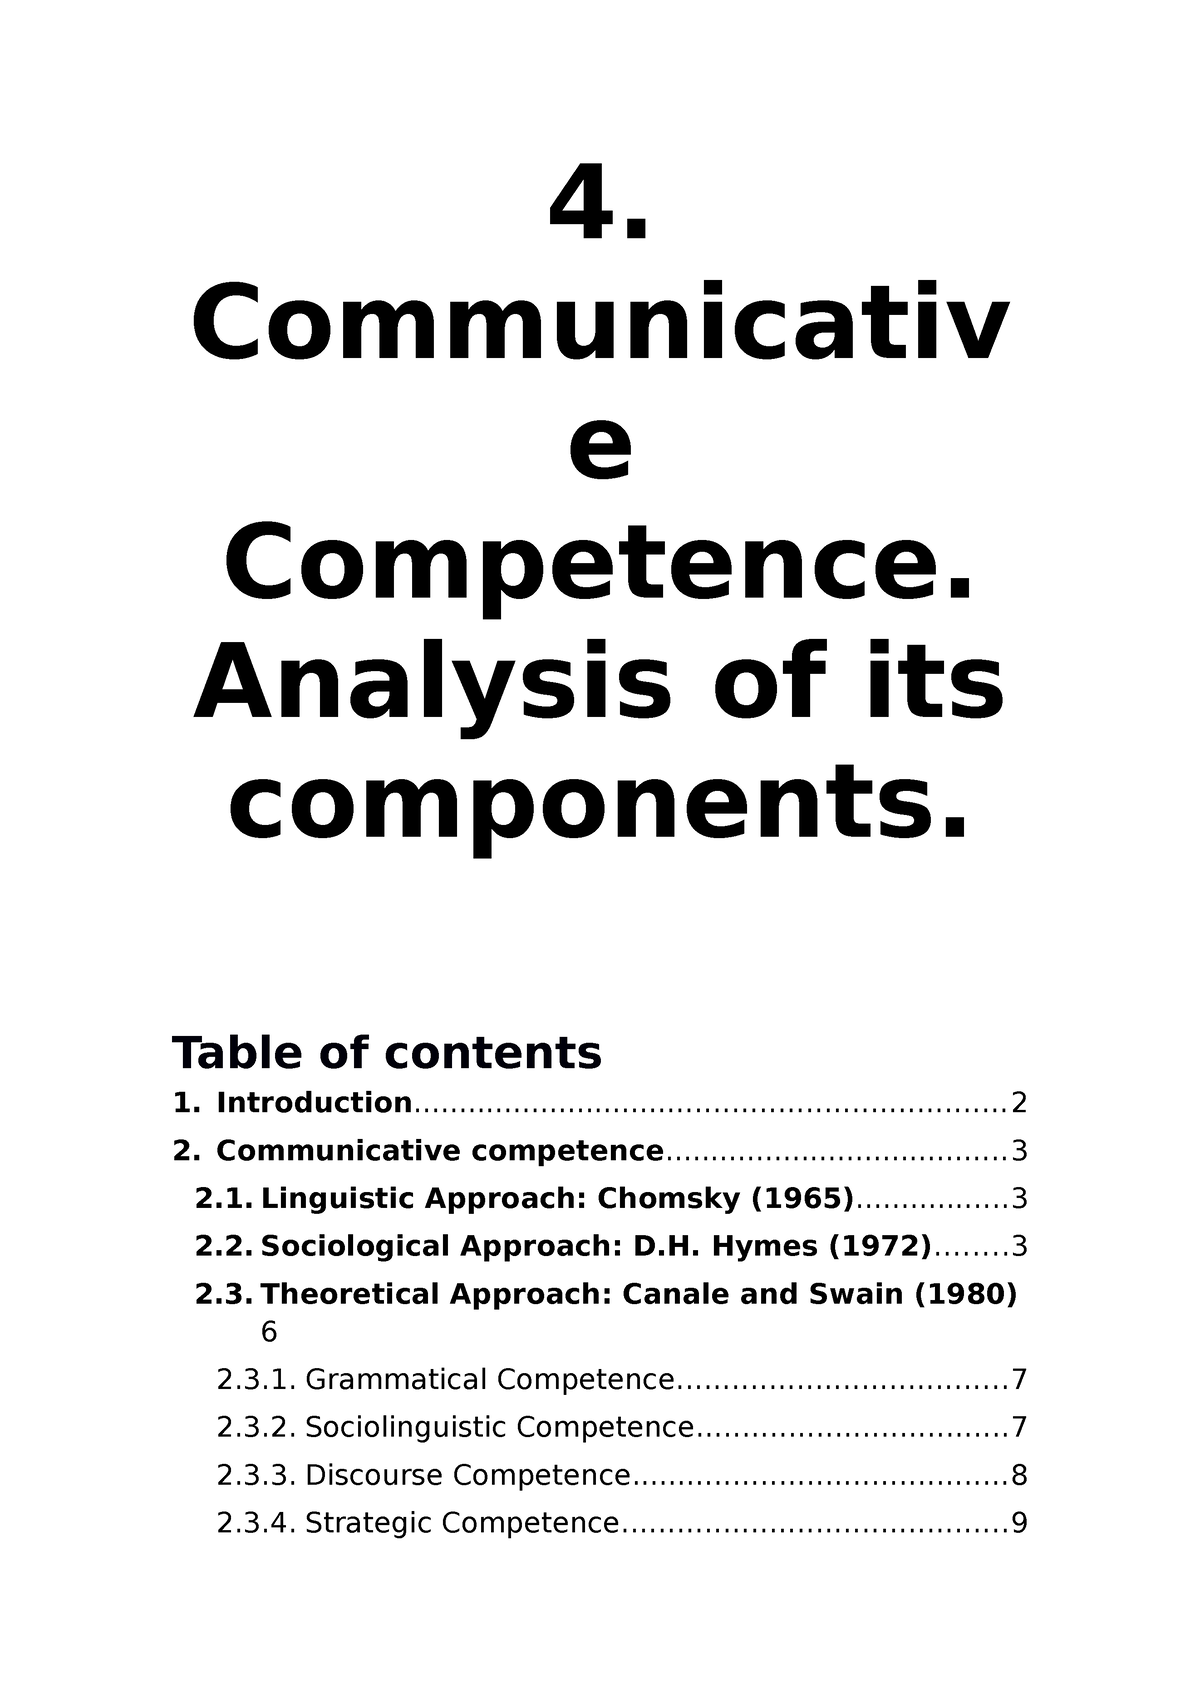 components of communicative competence essay